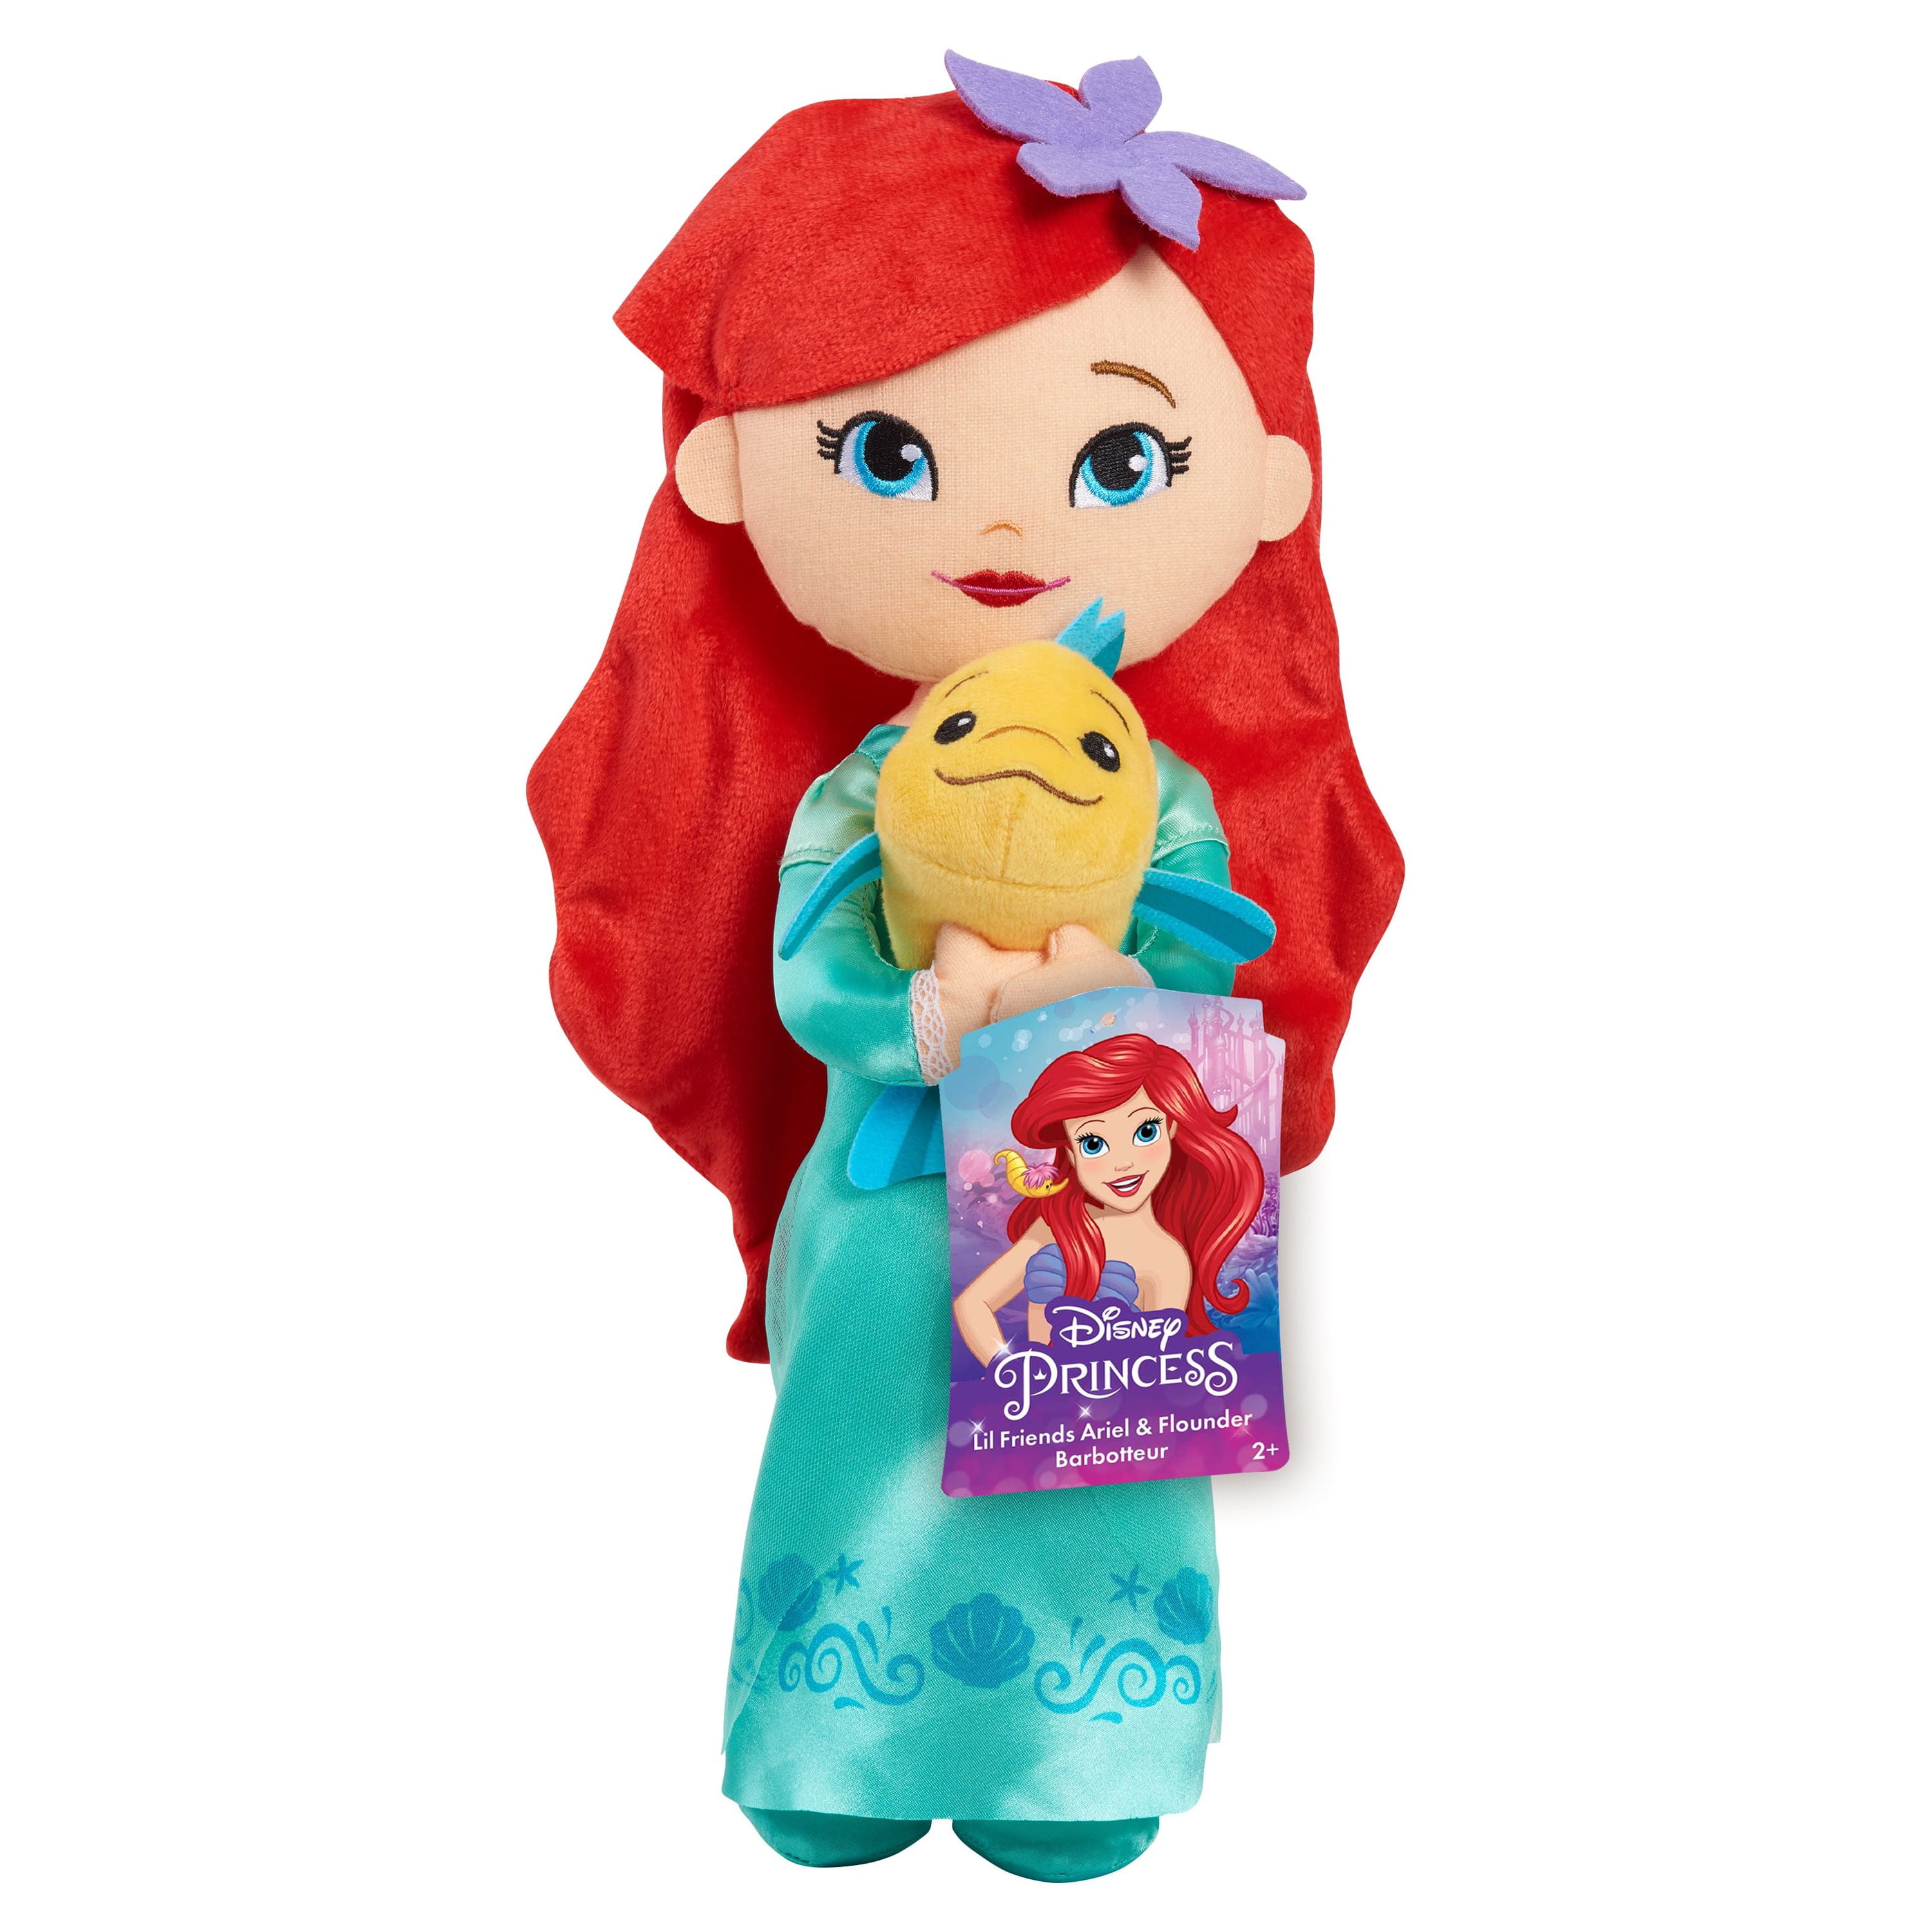 Disney Princess Lil' Friends Ariel & Flounder 14-inch Plush Doll,  Officially Licensed Kids Toys for Ages 3 Up, Gifts and Presents